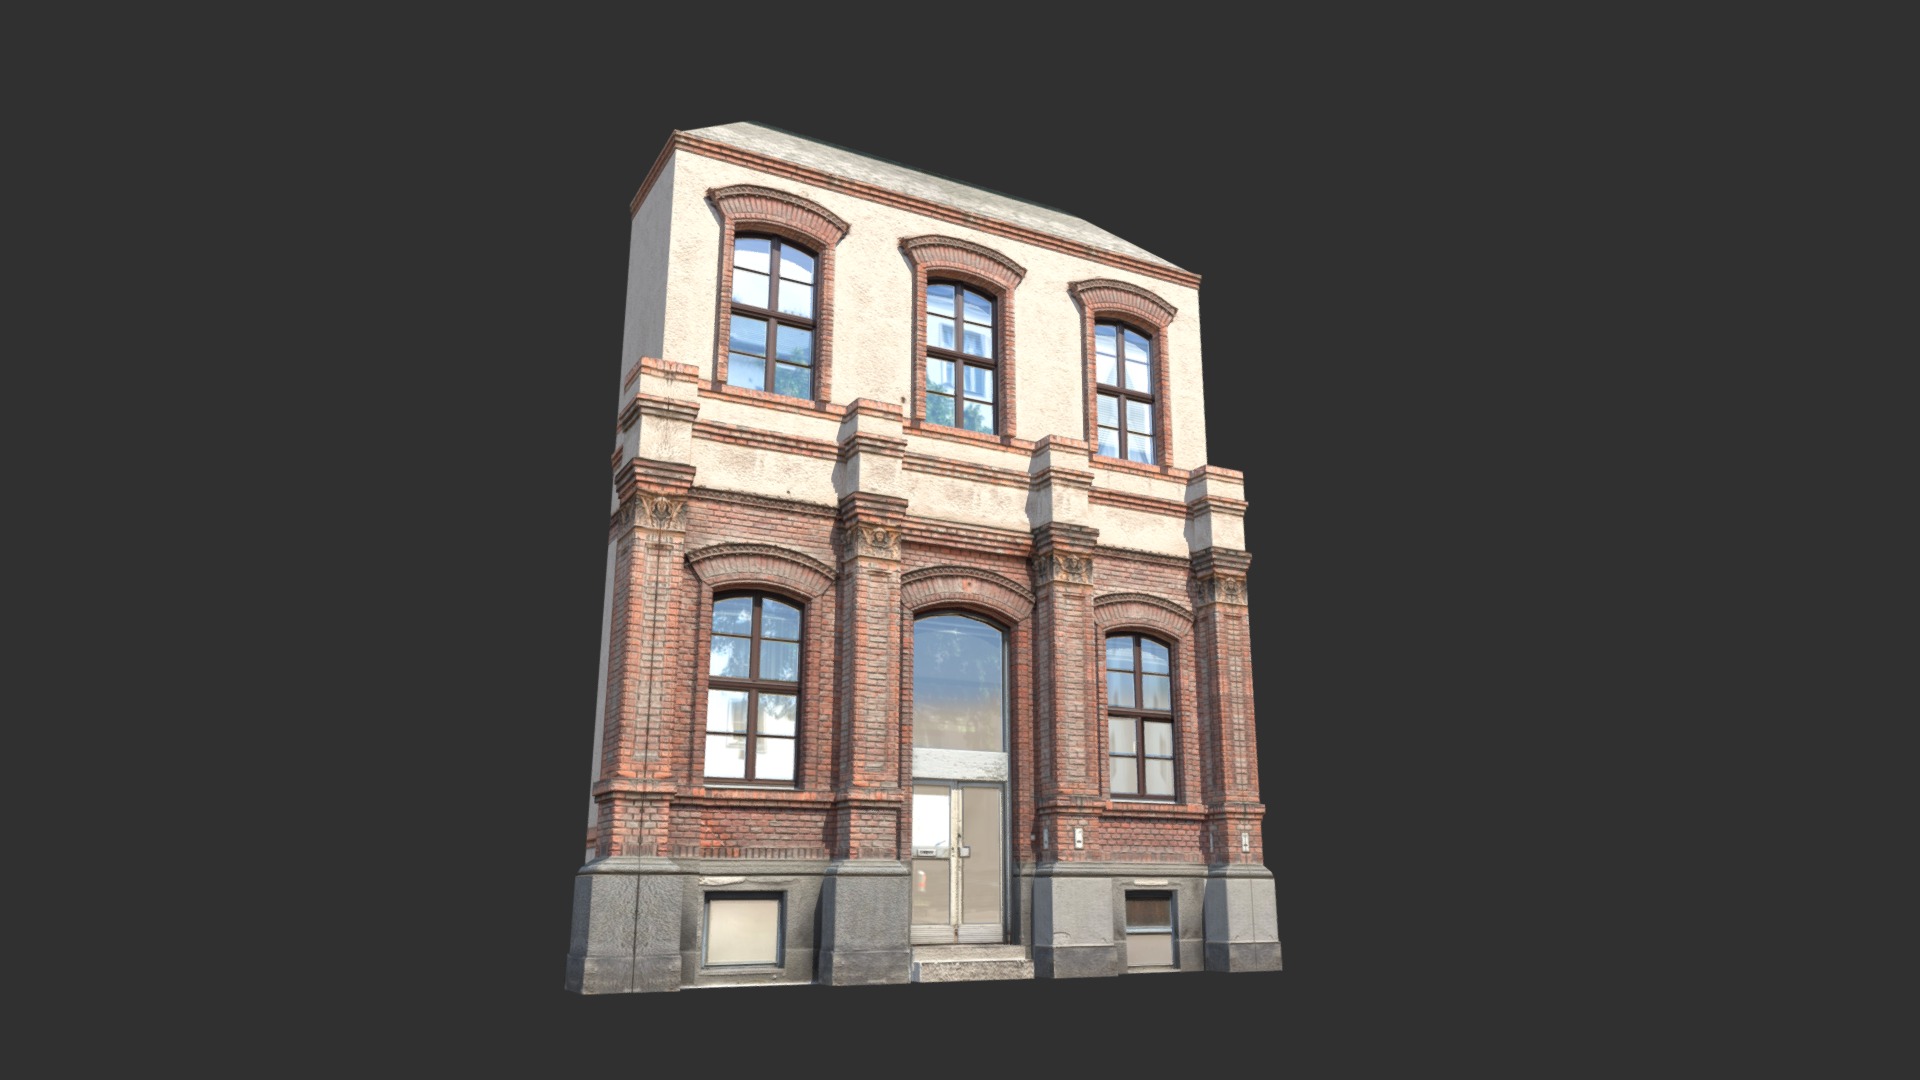 3D model Apartment House #63 Low Poly 3d Model - This is a 3D model of the Apartment House #63 Low Poly 3d Model. The 3D model is about a brick building with windows.